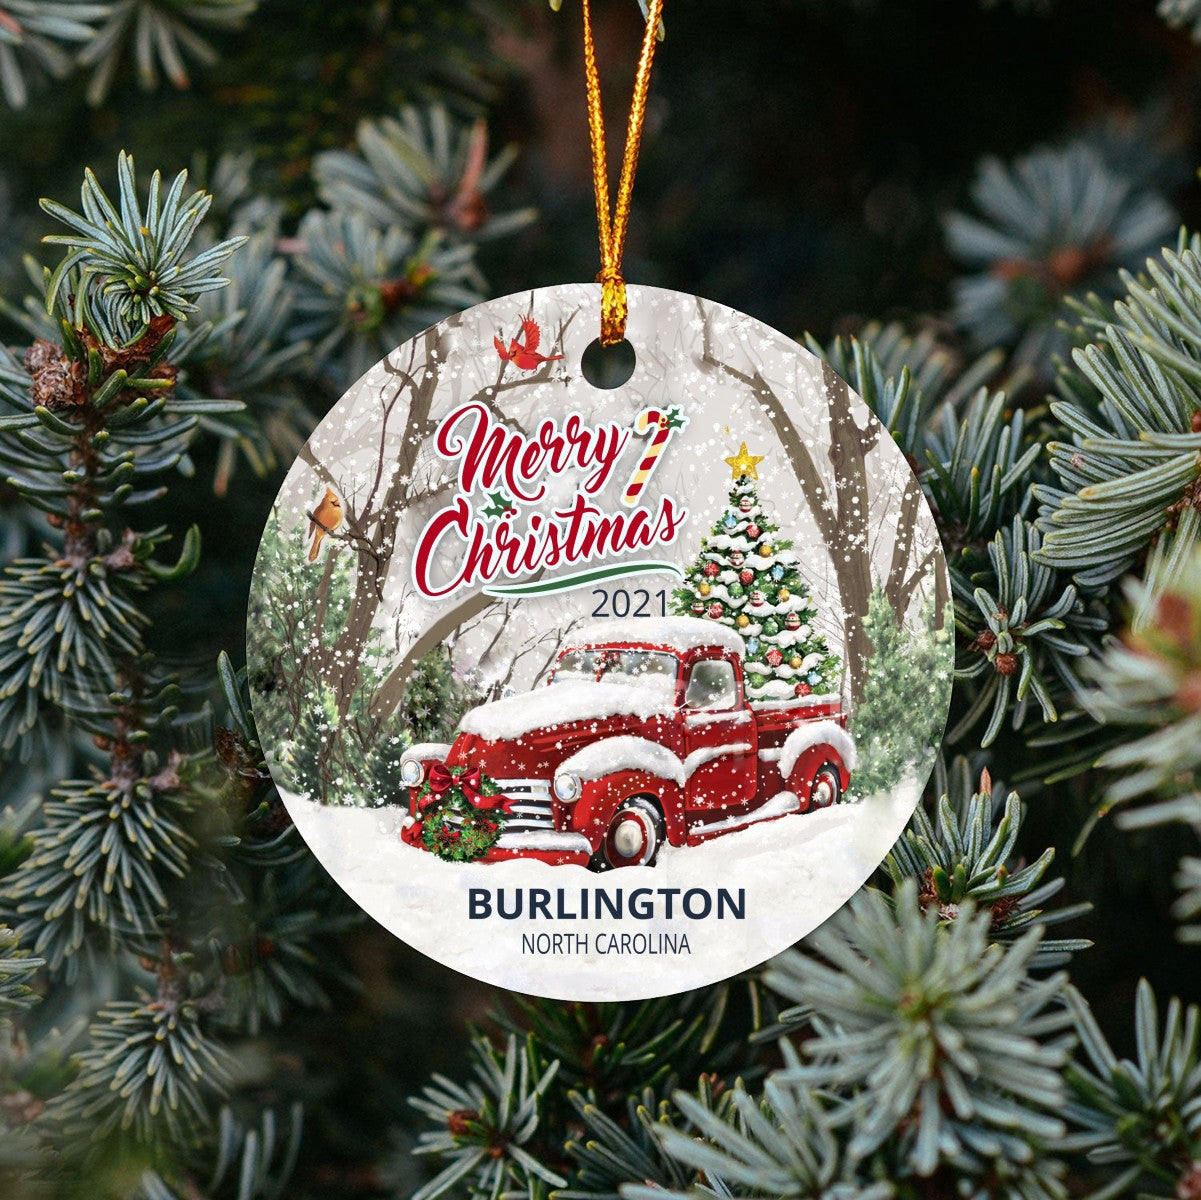 Christmas Tree Ornaments Burlington - Ornament Customize With Name City And State Burlington North Carolina NC - Red Truck Xmas Ornaments 3'' Plastic Gift For Family, Friend And Housewarming